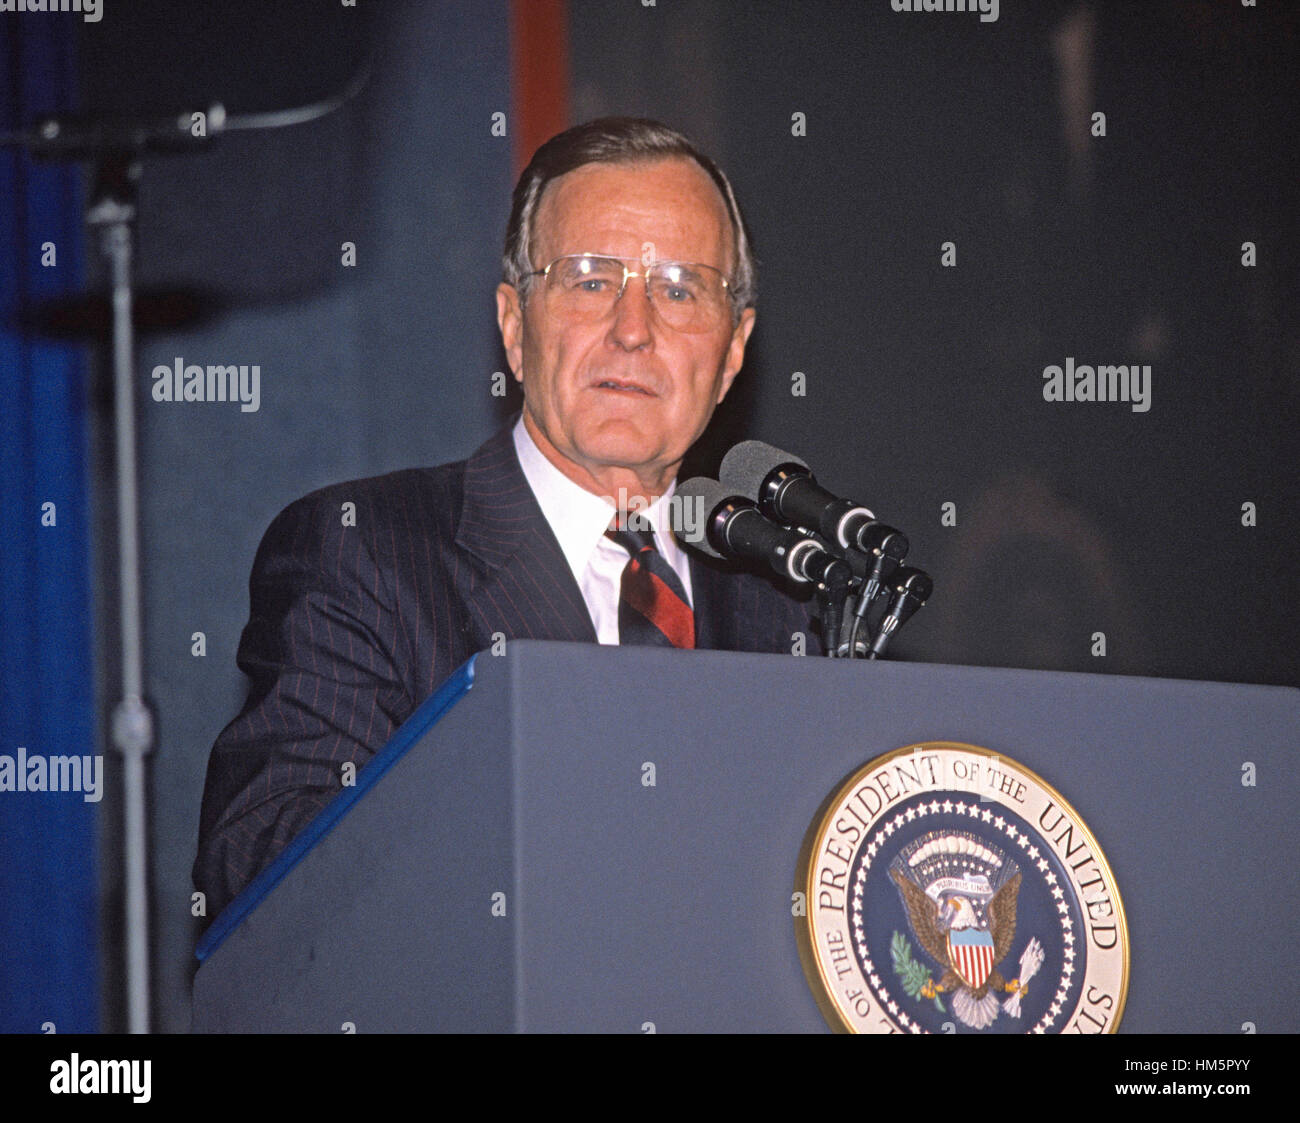 United States President George H.W. Bush makes remarks at the AFL-CIO convention in Washington, D.C. on November 15, 1989. Stock Photo